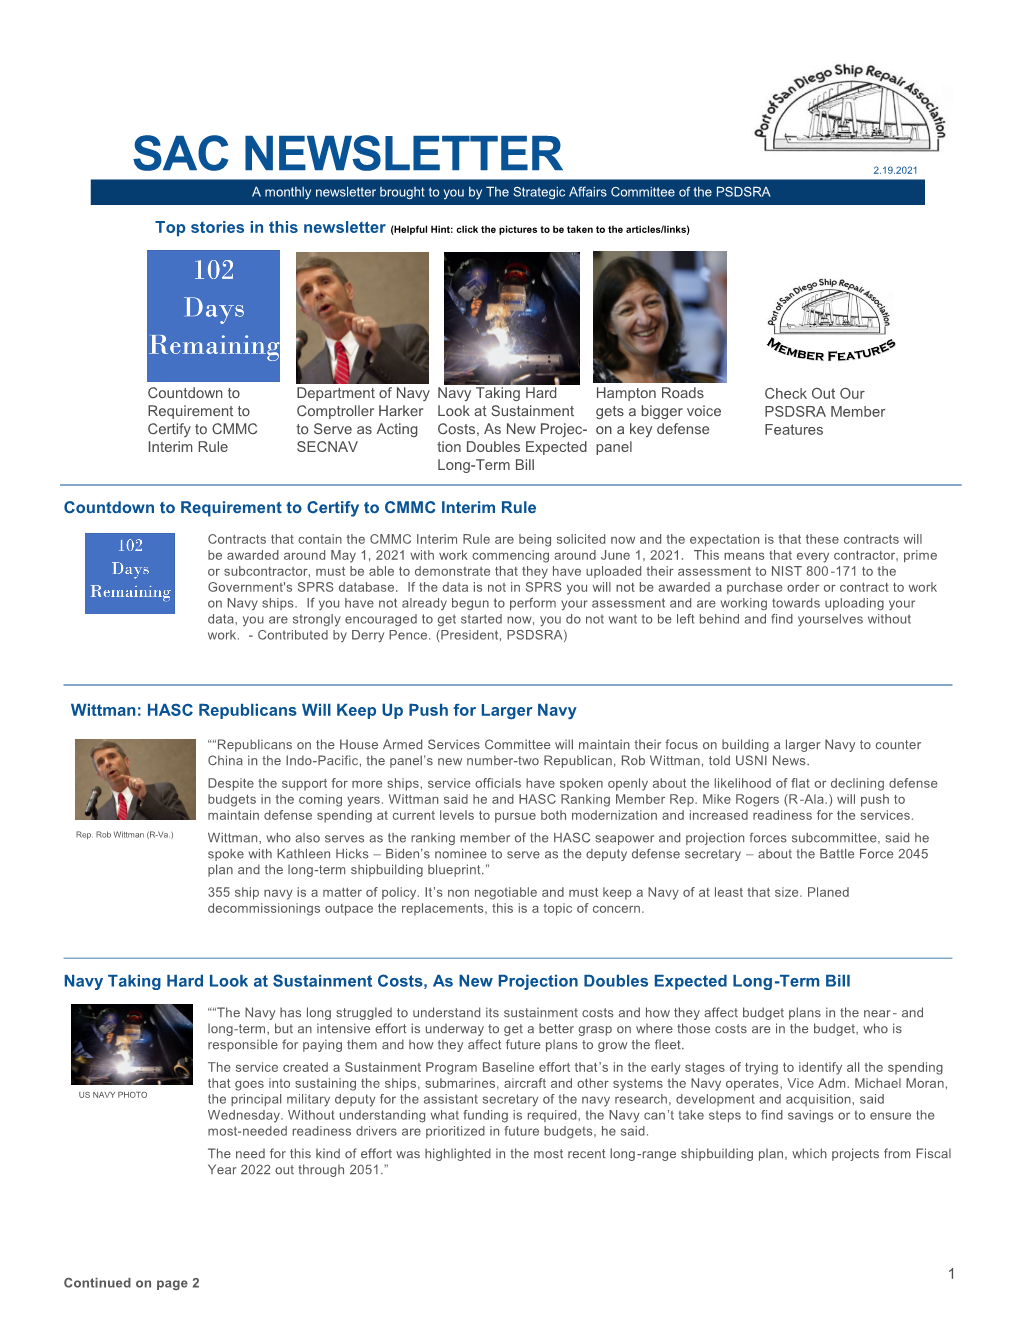 SAC NEWSLETTER 2.19.2021 a Monthly Newsletter Brought to You by the Strategic Affairs Committee of the PSDSRA